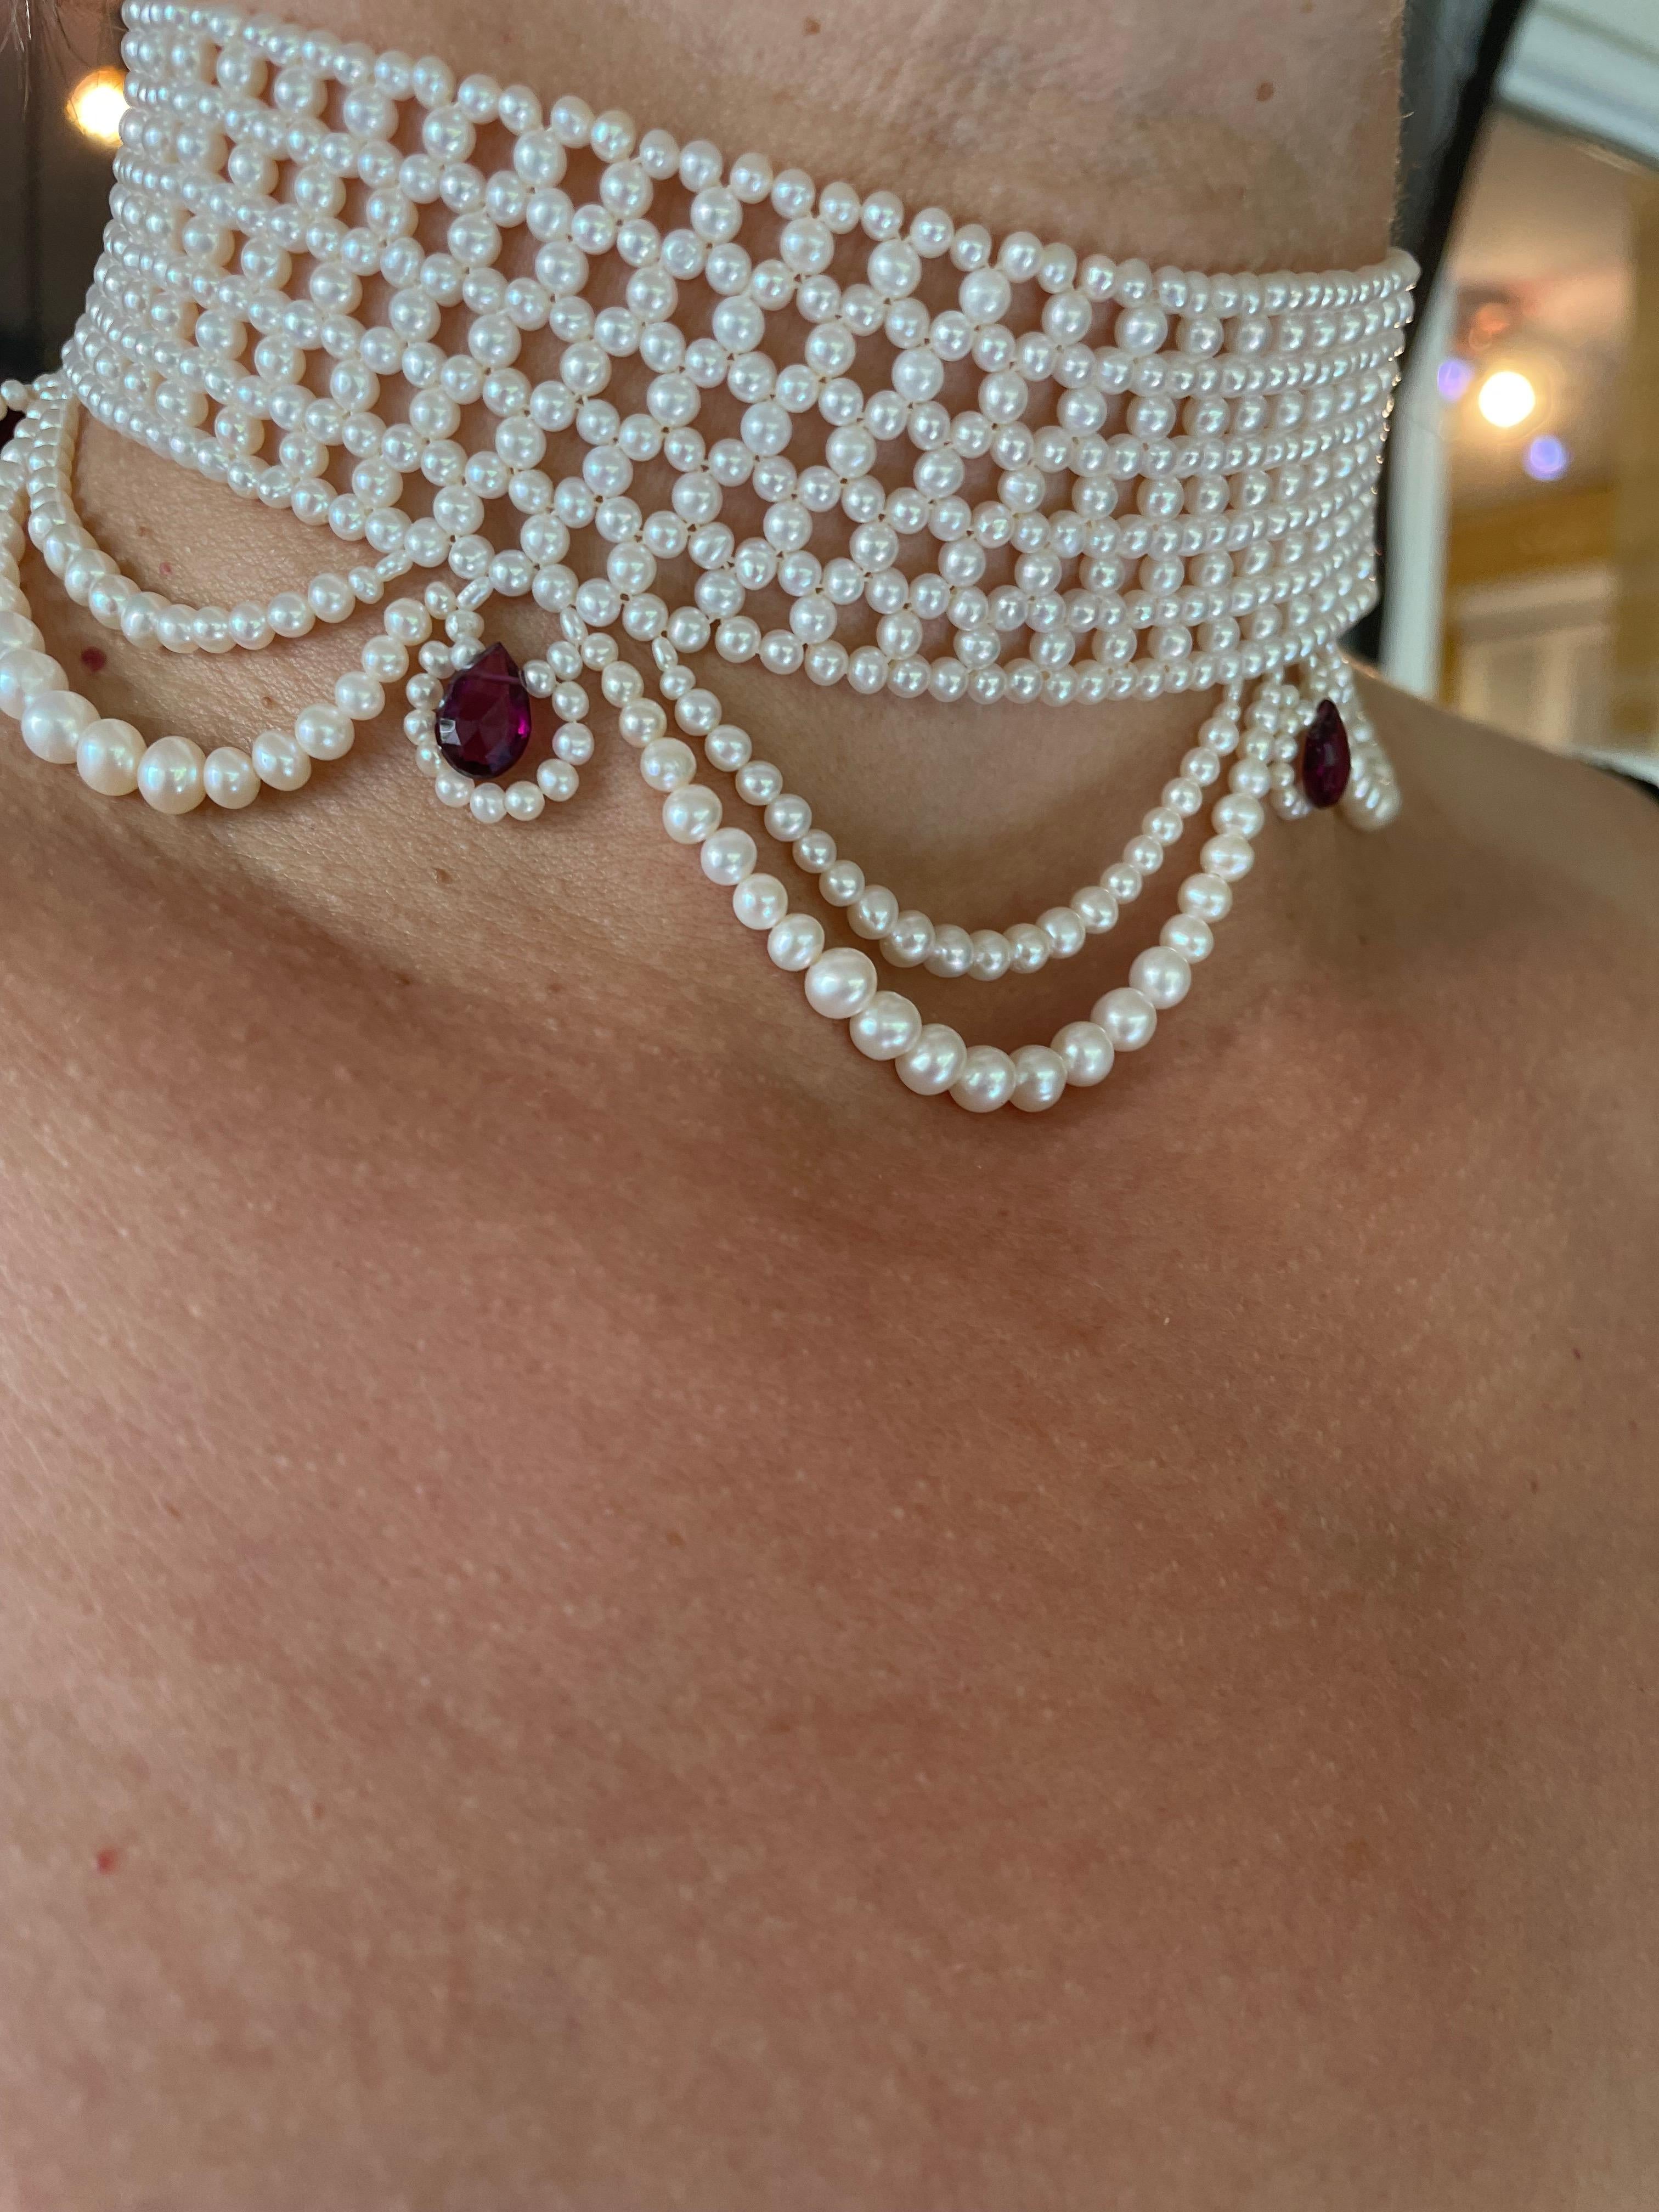 Marina J Woven Pearl Choker with Pearl Drapes, Garnet Briolettes and 14 K Gold 2